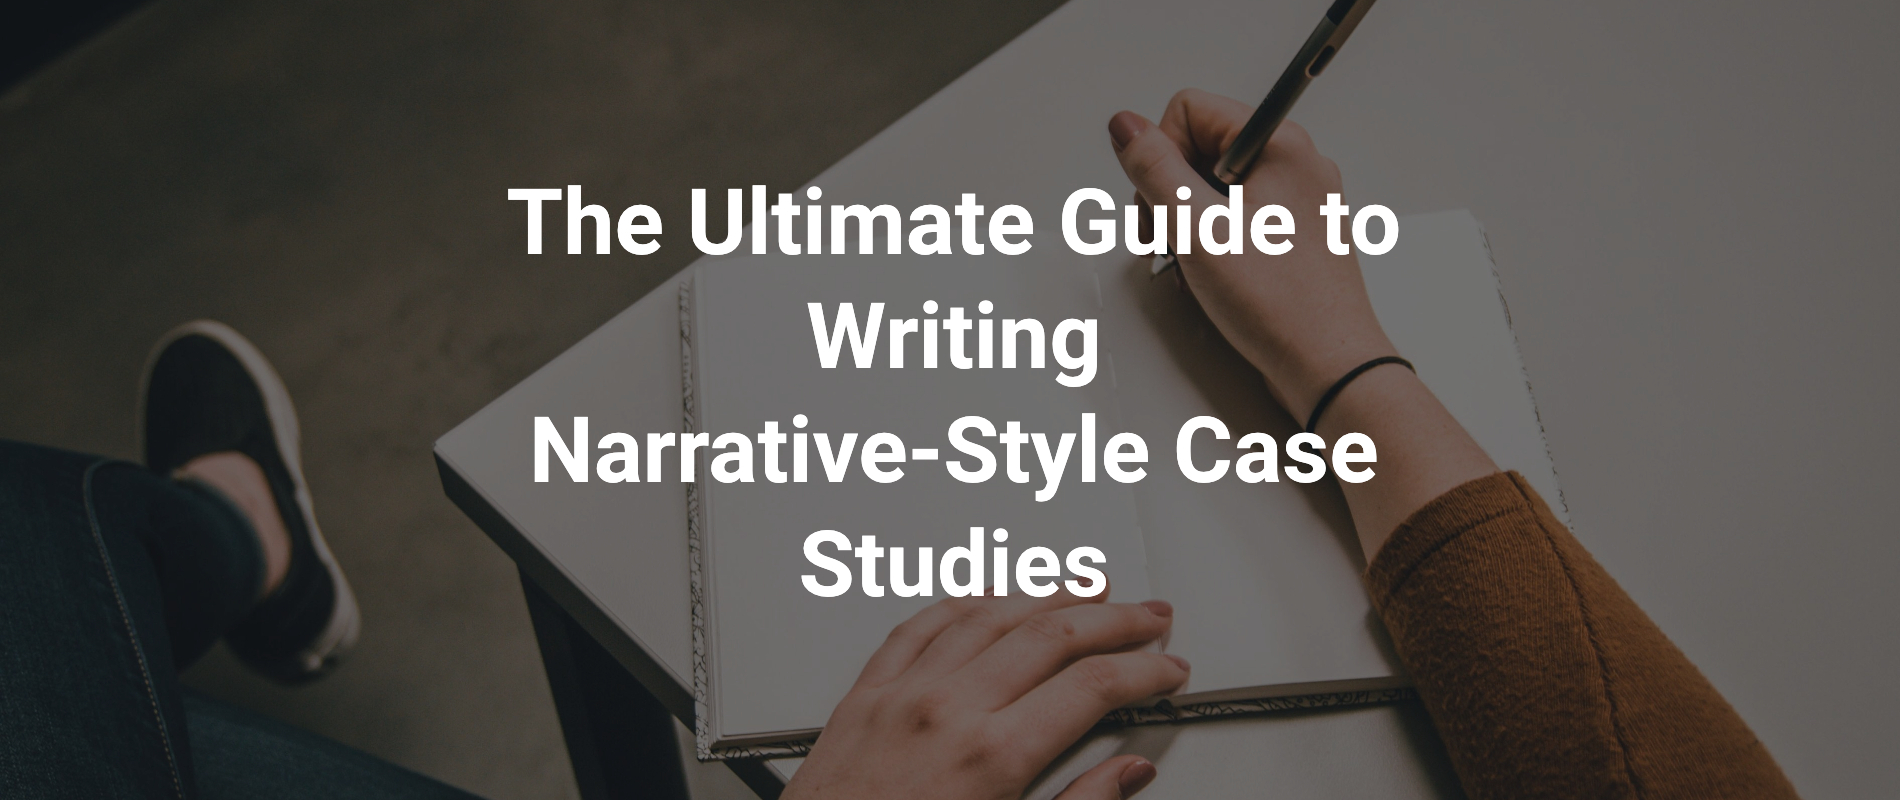 The Ultimate Guide to Writing Narrative-Style Case Studies